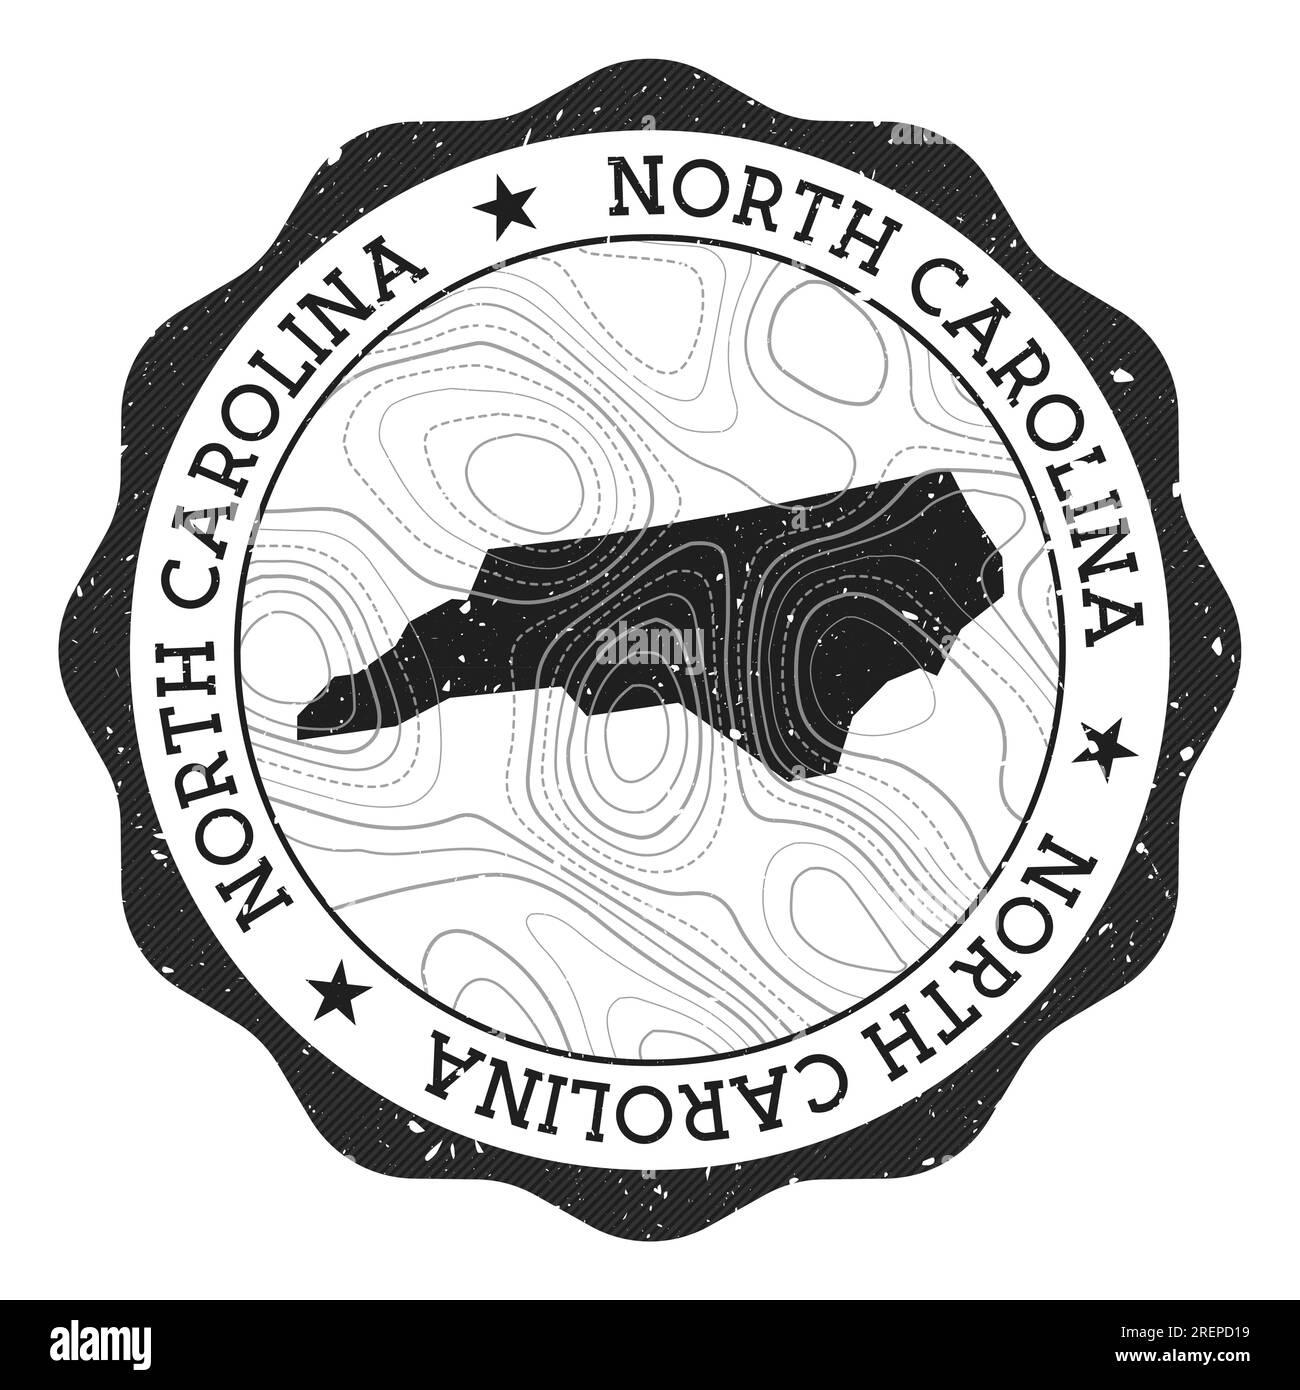 North Carolina outdoor stamp. Round sticker with map of us state with topographic isolines. Vector illustration. Can be used as insignia, logotype, la Stock Vector